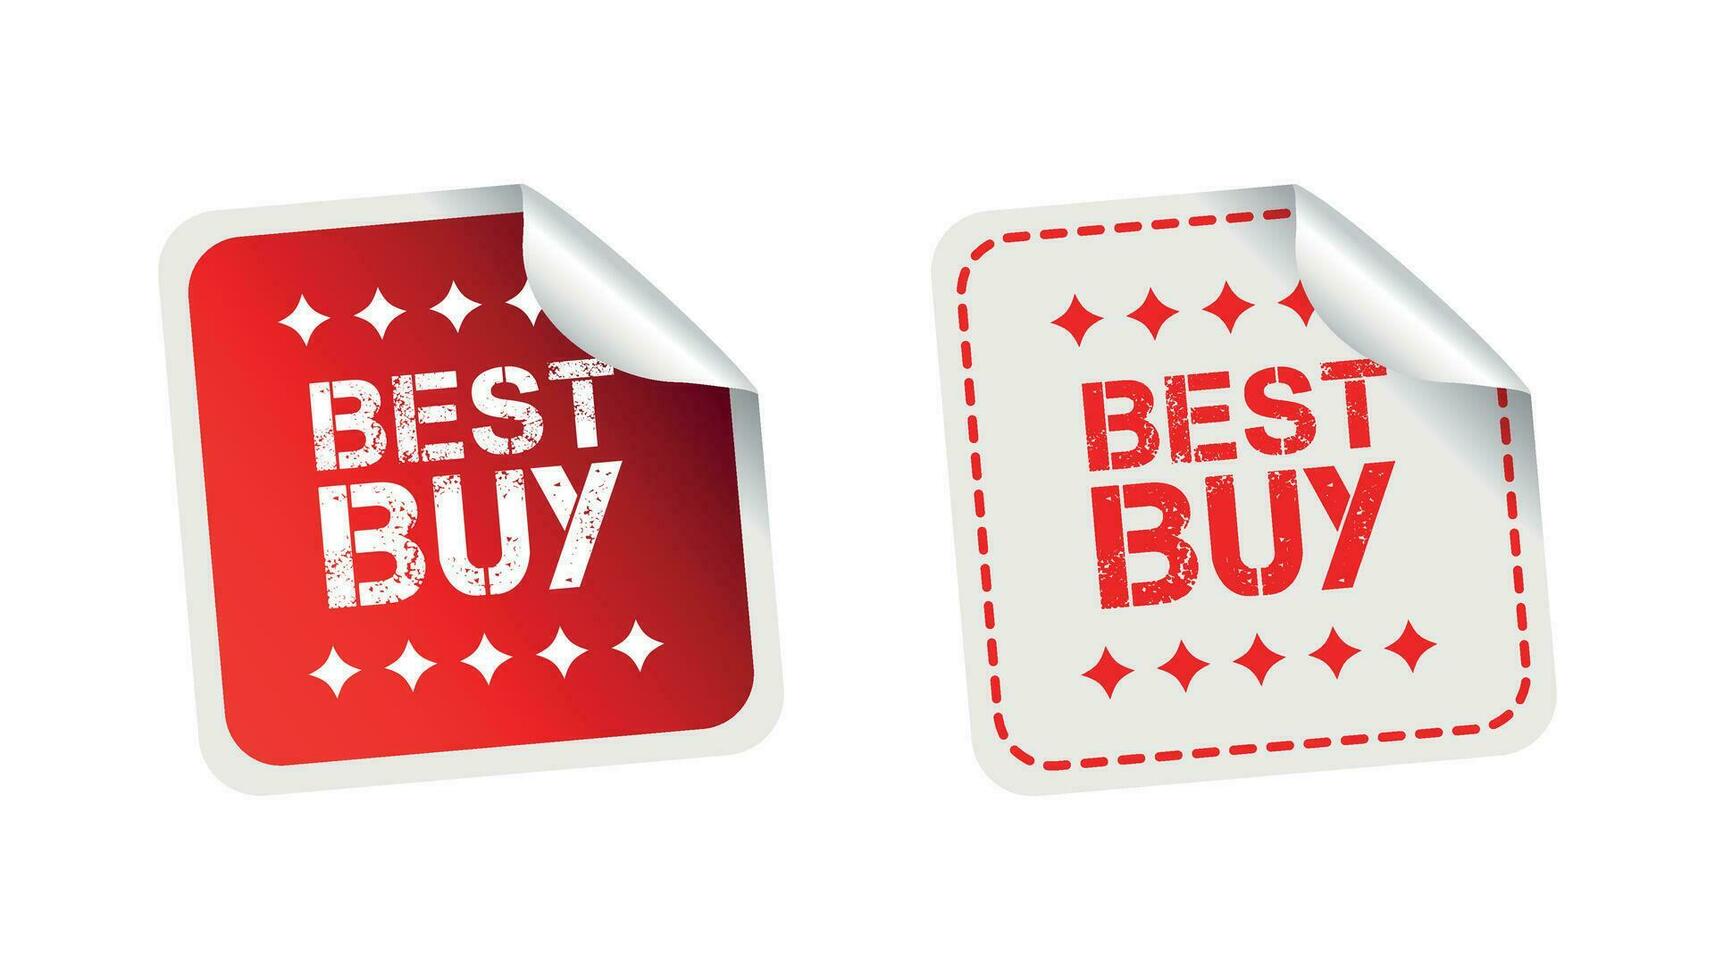 Best buy stickers. Vector illustration on white background.